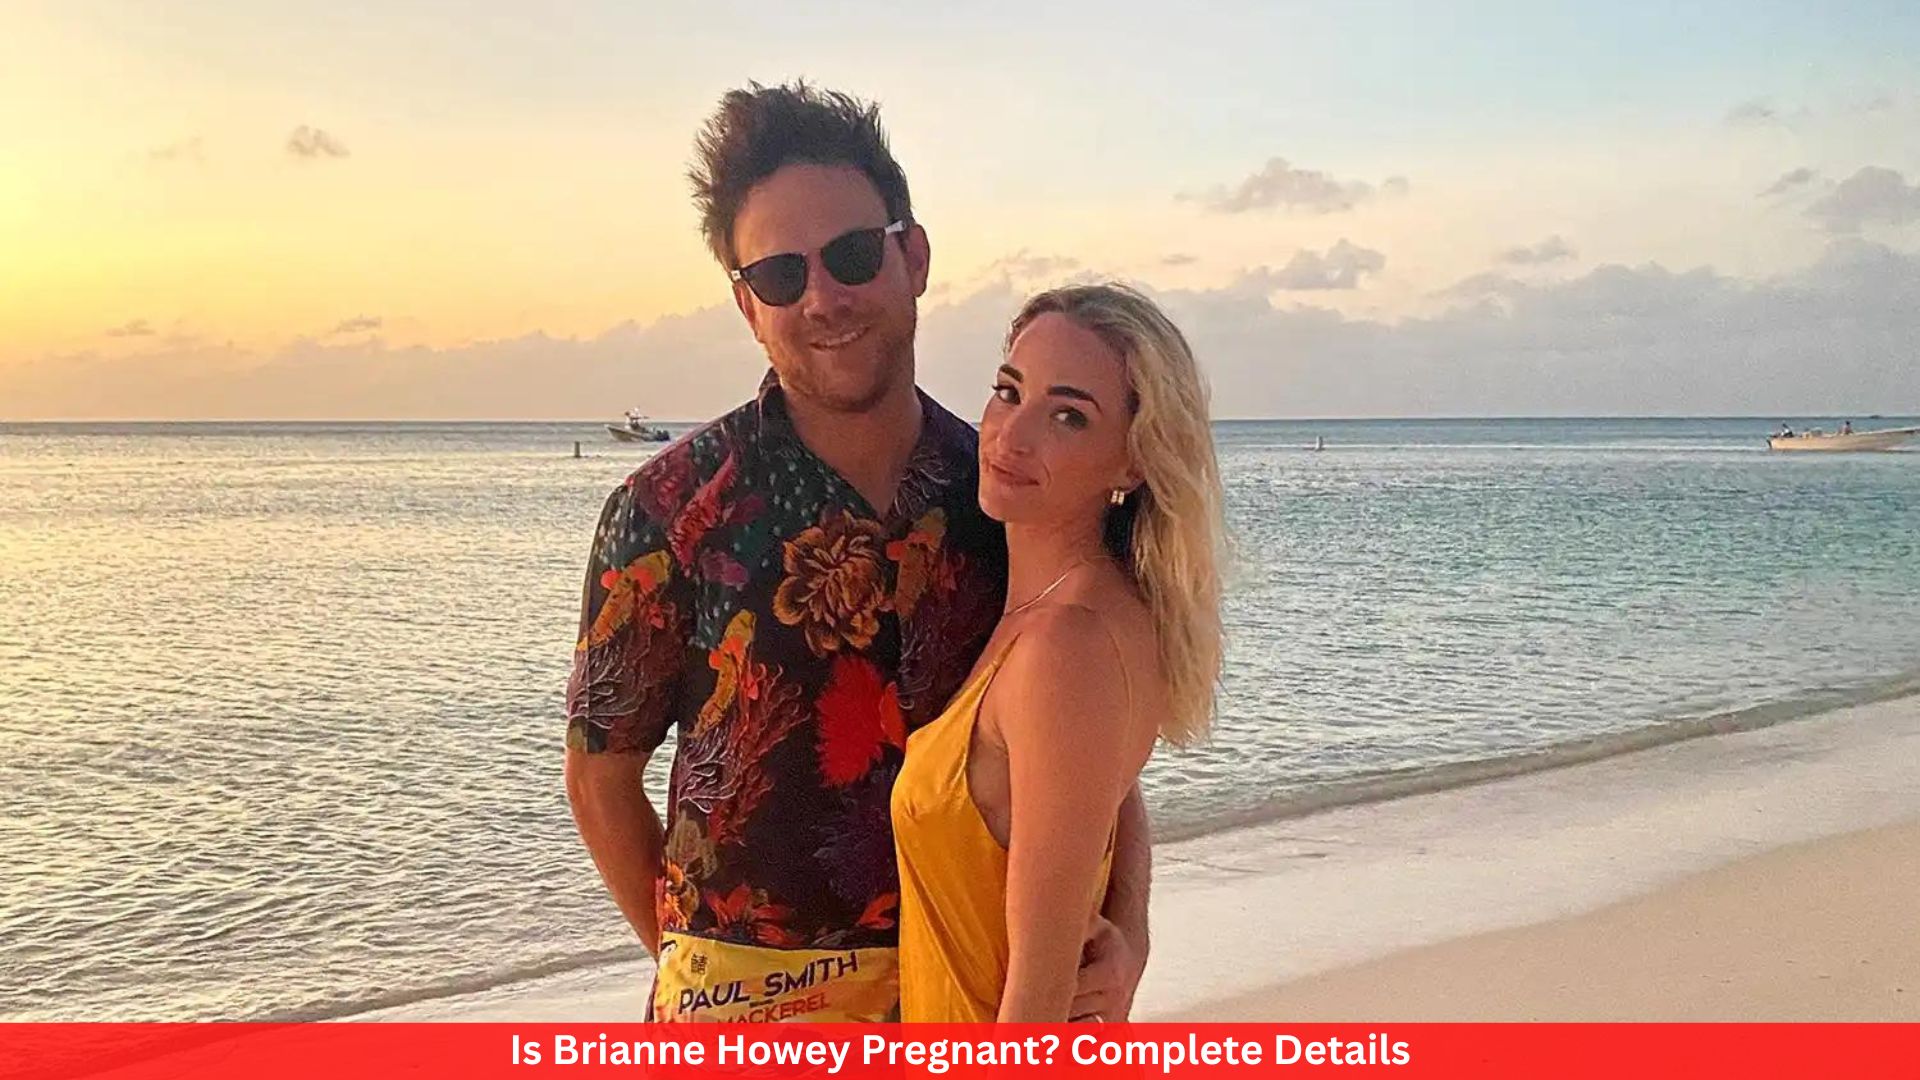 Is Brianne Howey Pregnant? Complete Details